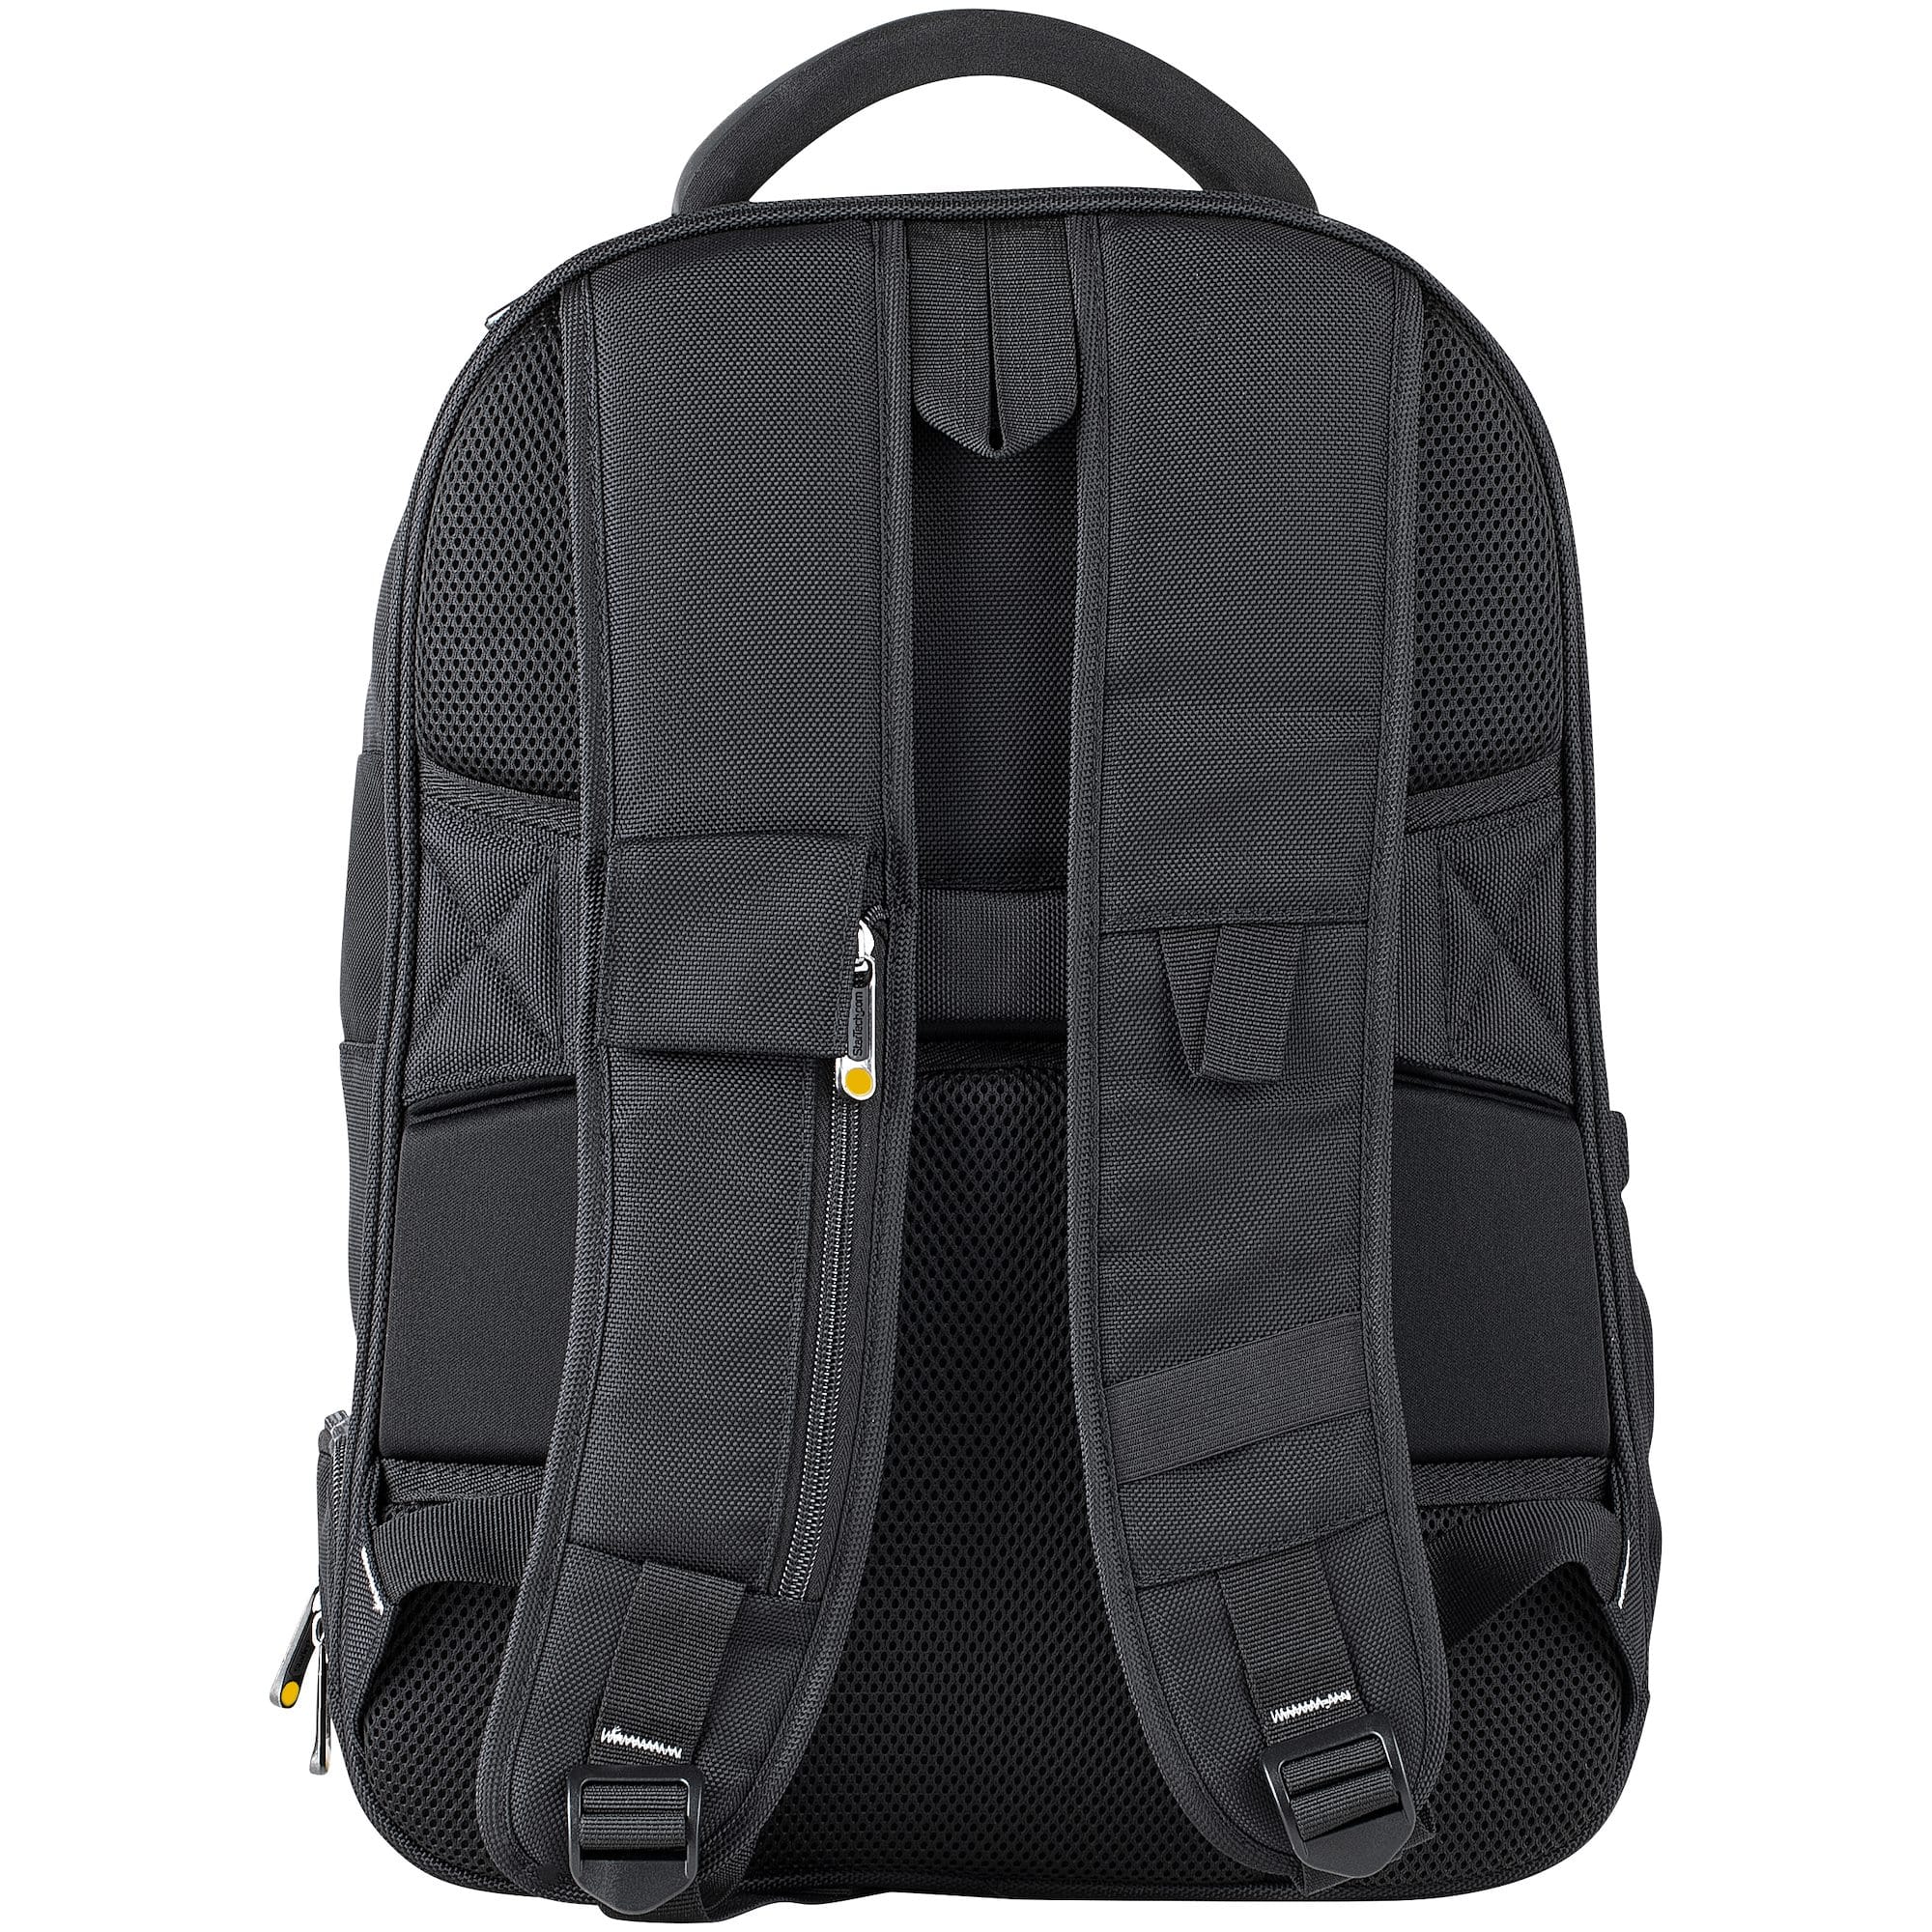 StarTech.com launches laptop backpack for commuters, travelers, and IT ...